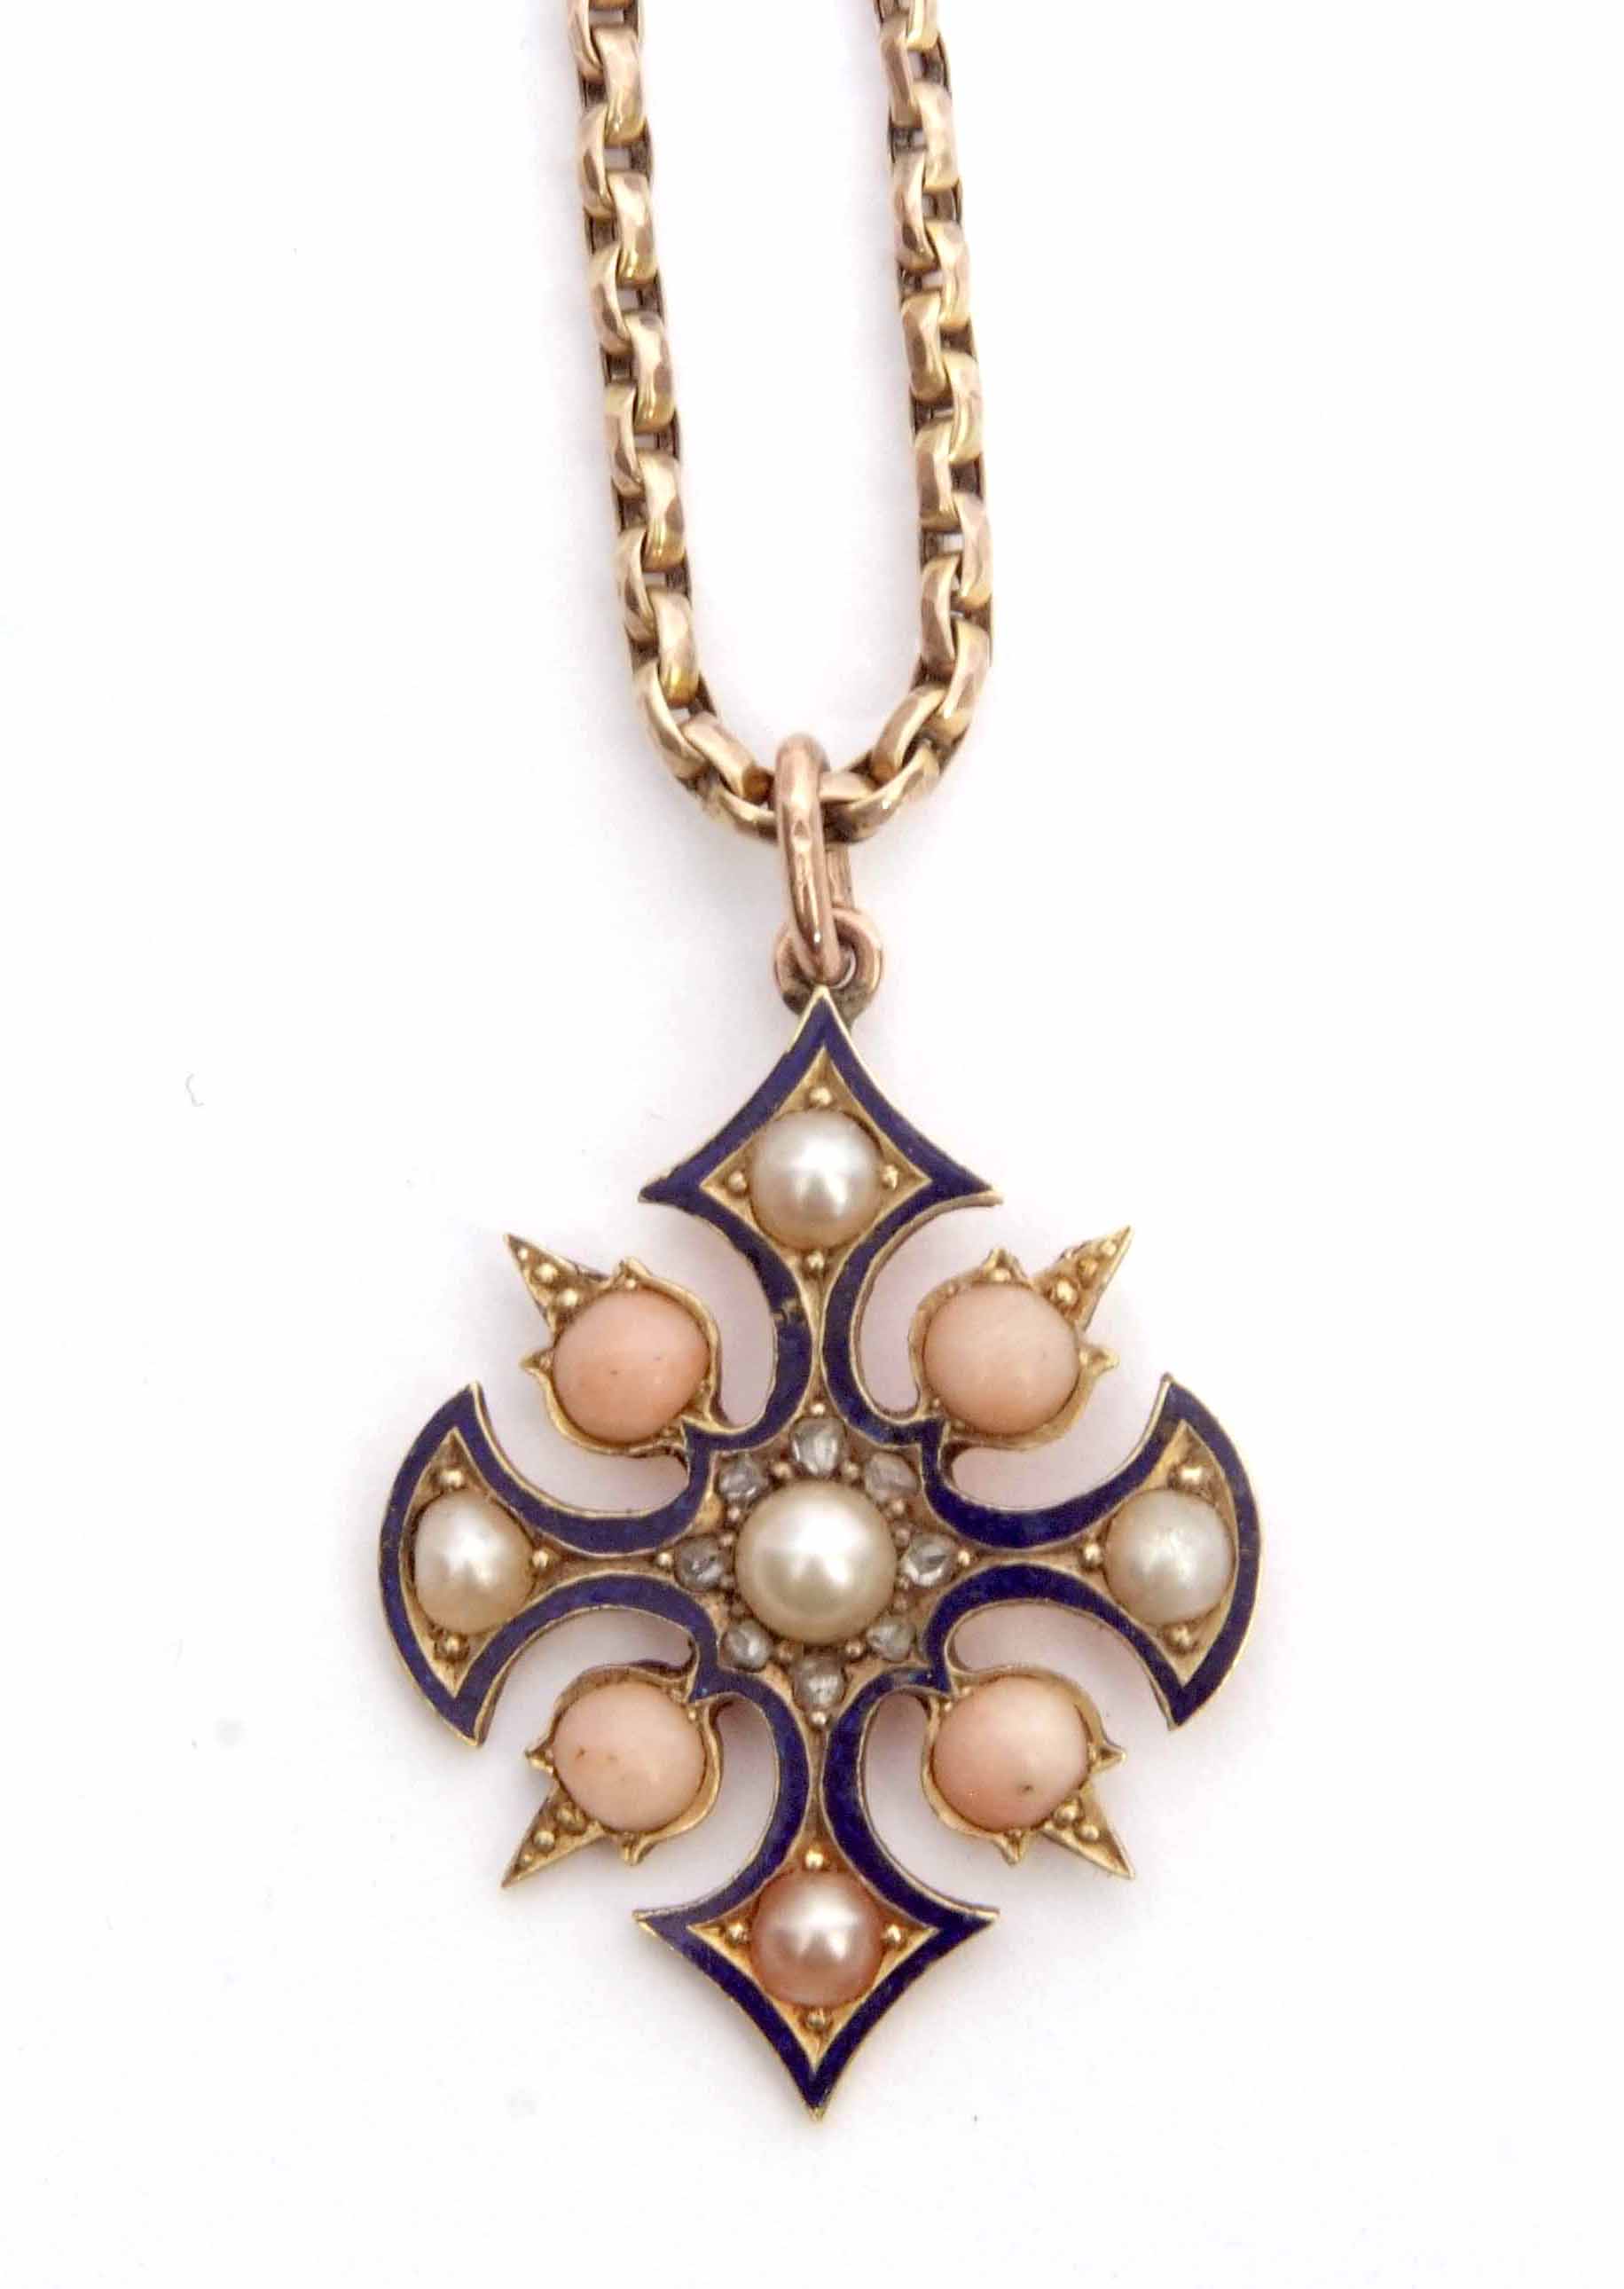 Antique blue enamel, pearl, coral and diamond set cross pendant featuring a central pearl surrounded - Image 6 of 7